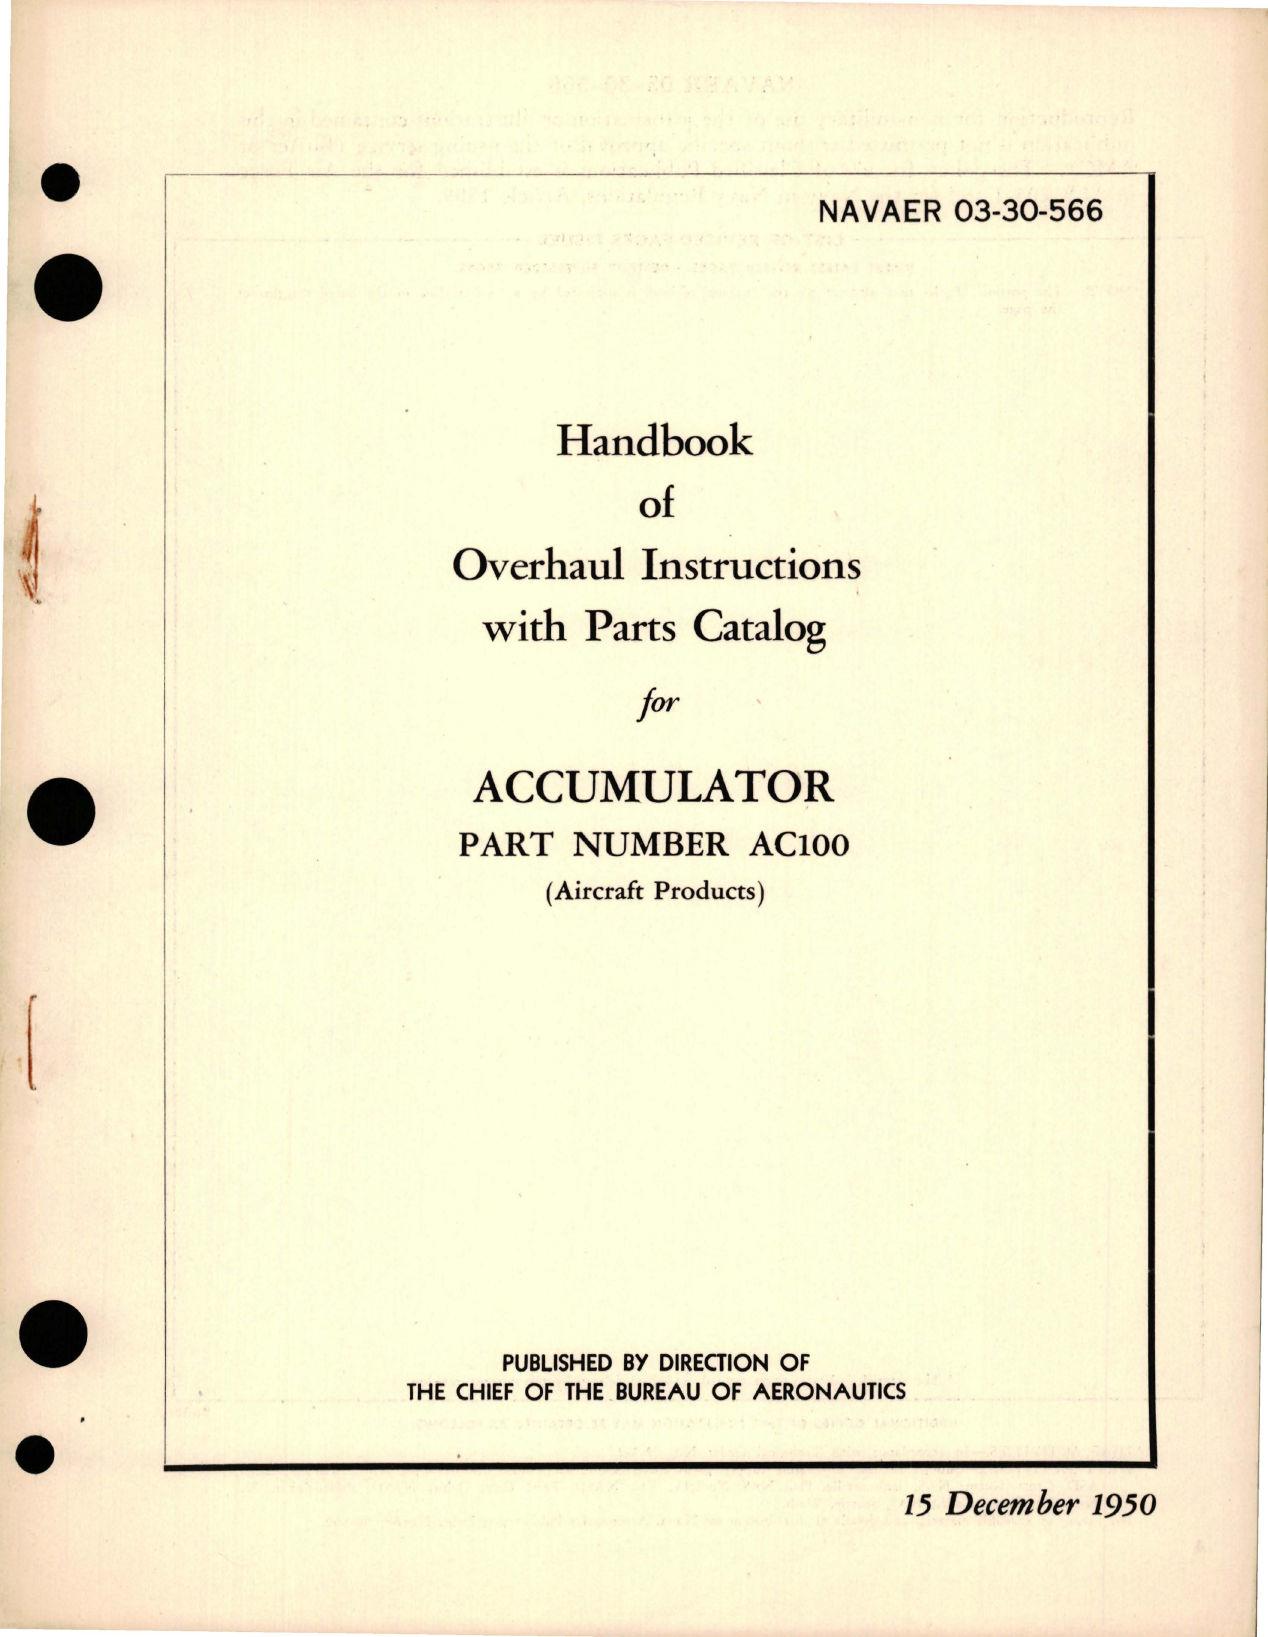 Sample page 1 from AirCorps Library document: Overhaul Instructions with Parts Catalog for Accumulator - PartAC100